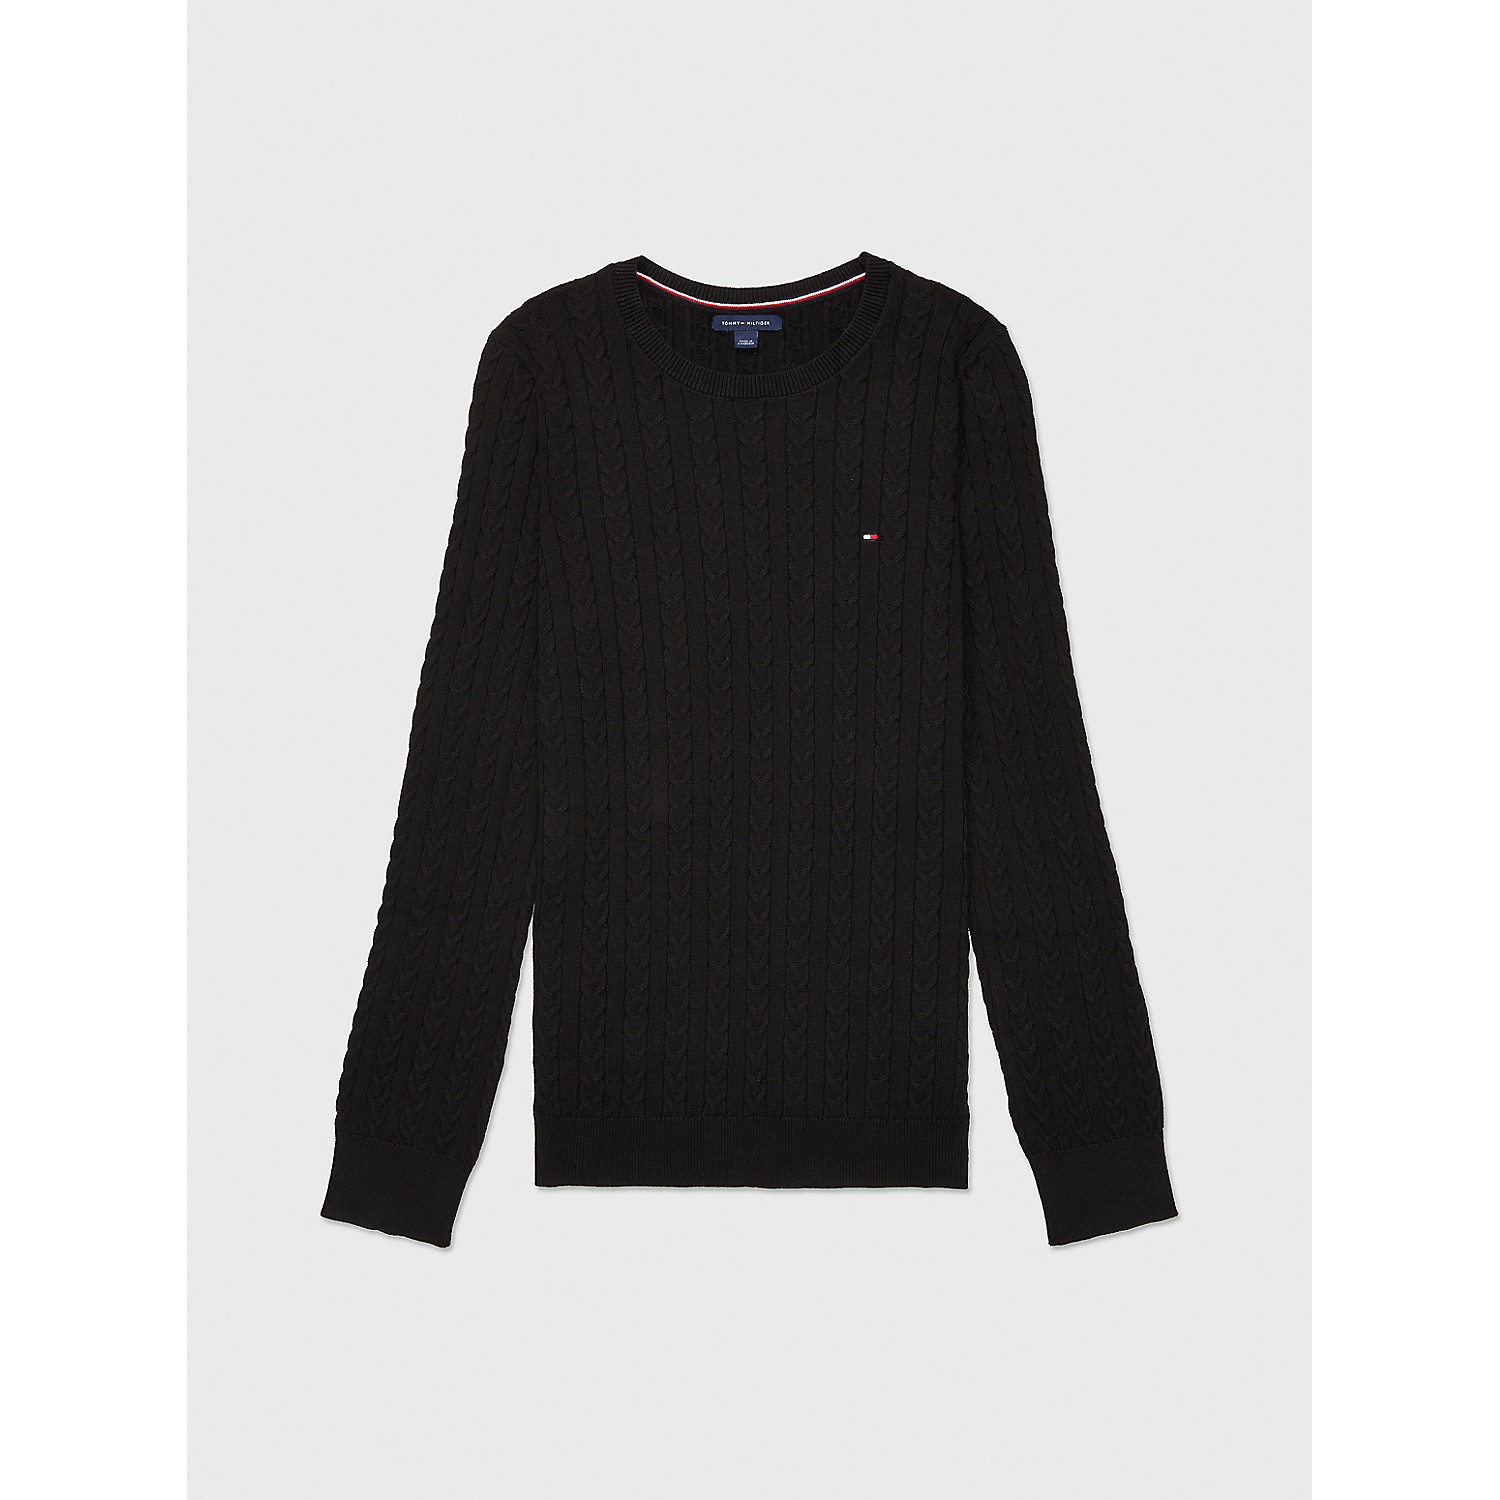 TOMMY HILFIGER Cotton Cable Knit Sweater